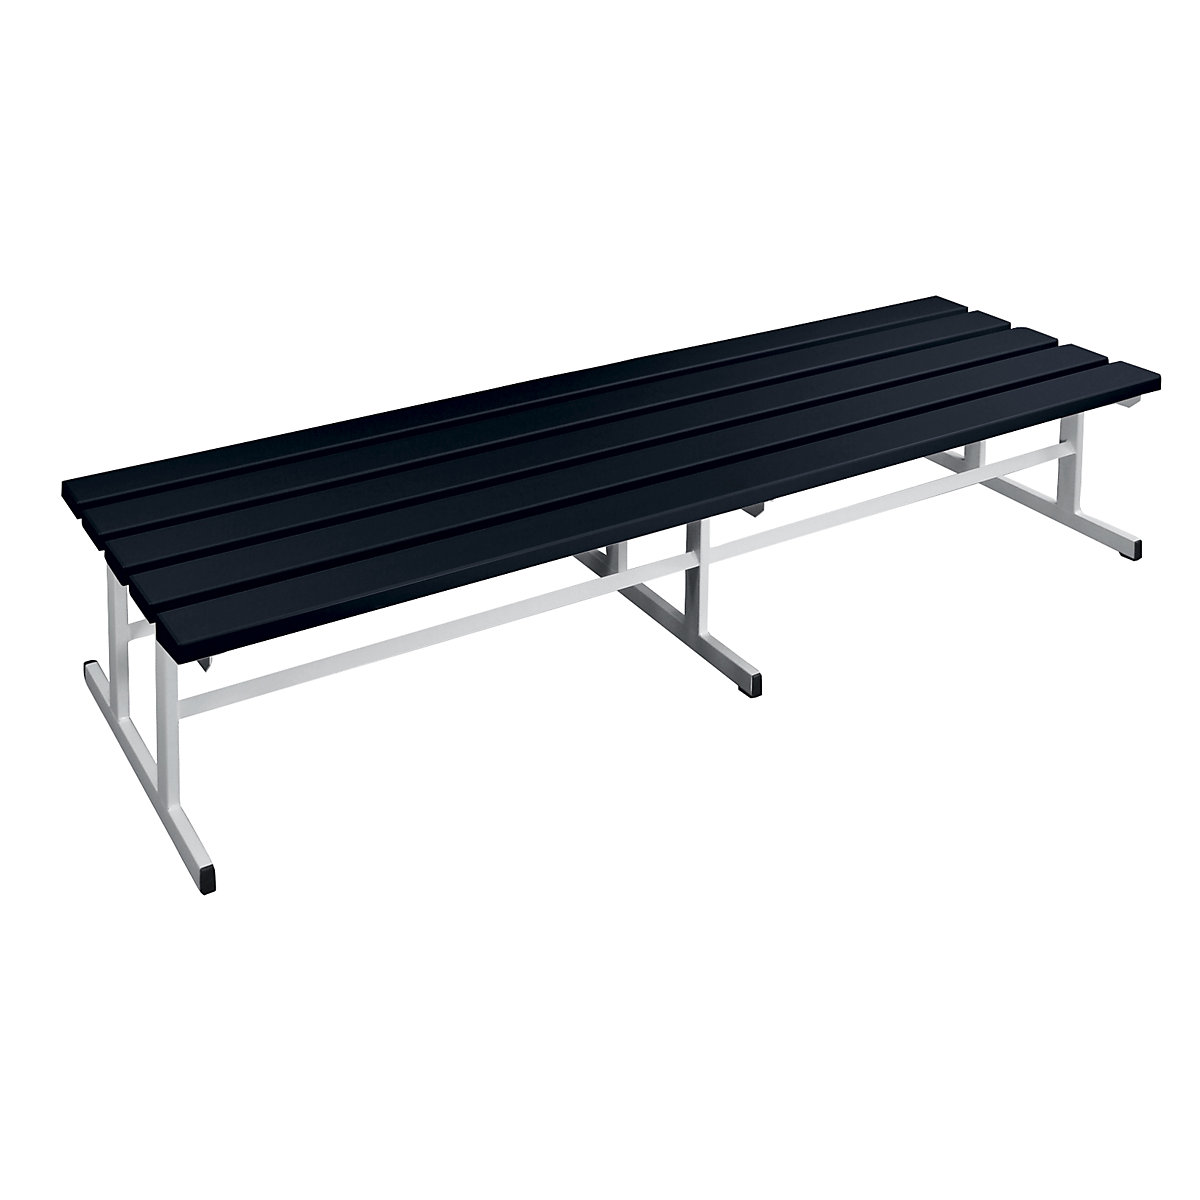 Wolf – Cloakroom bench, double sided seat, black, 2000 mm length